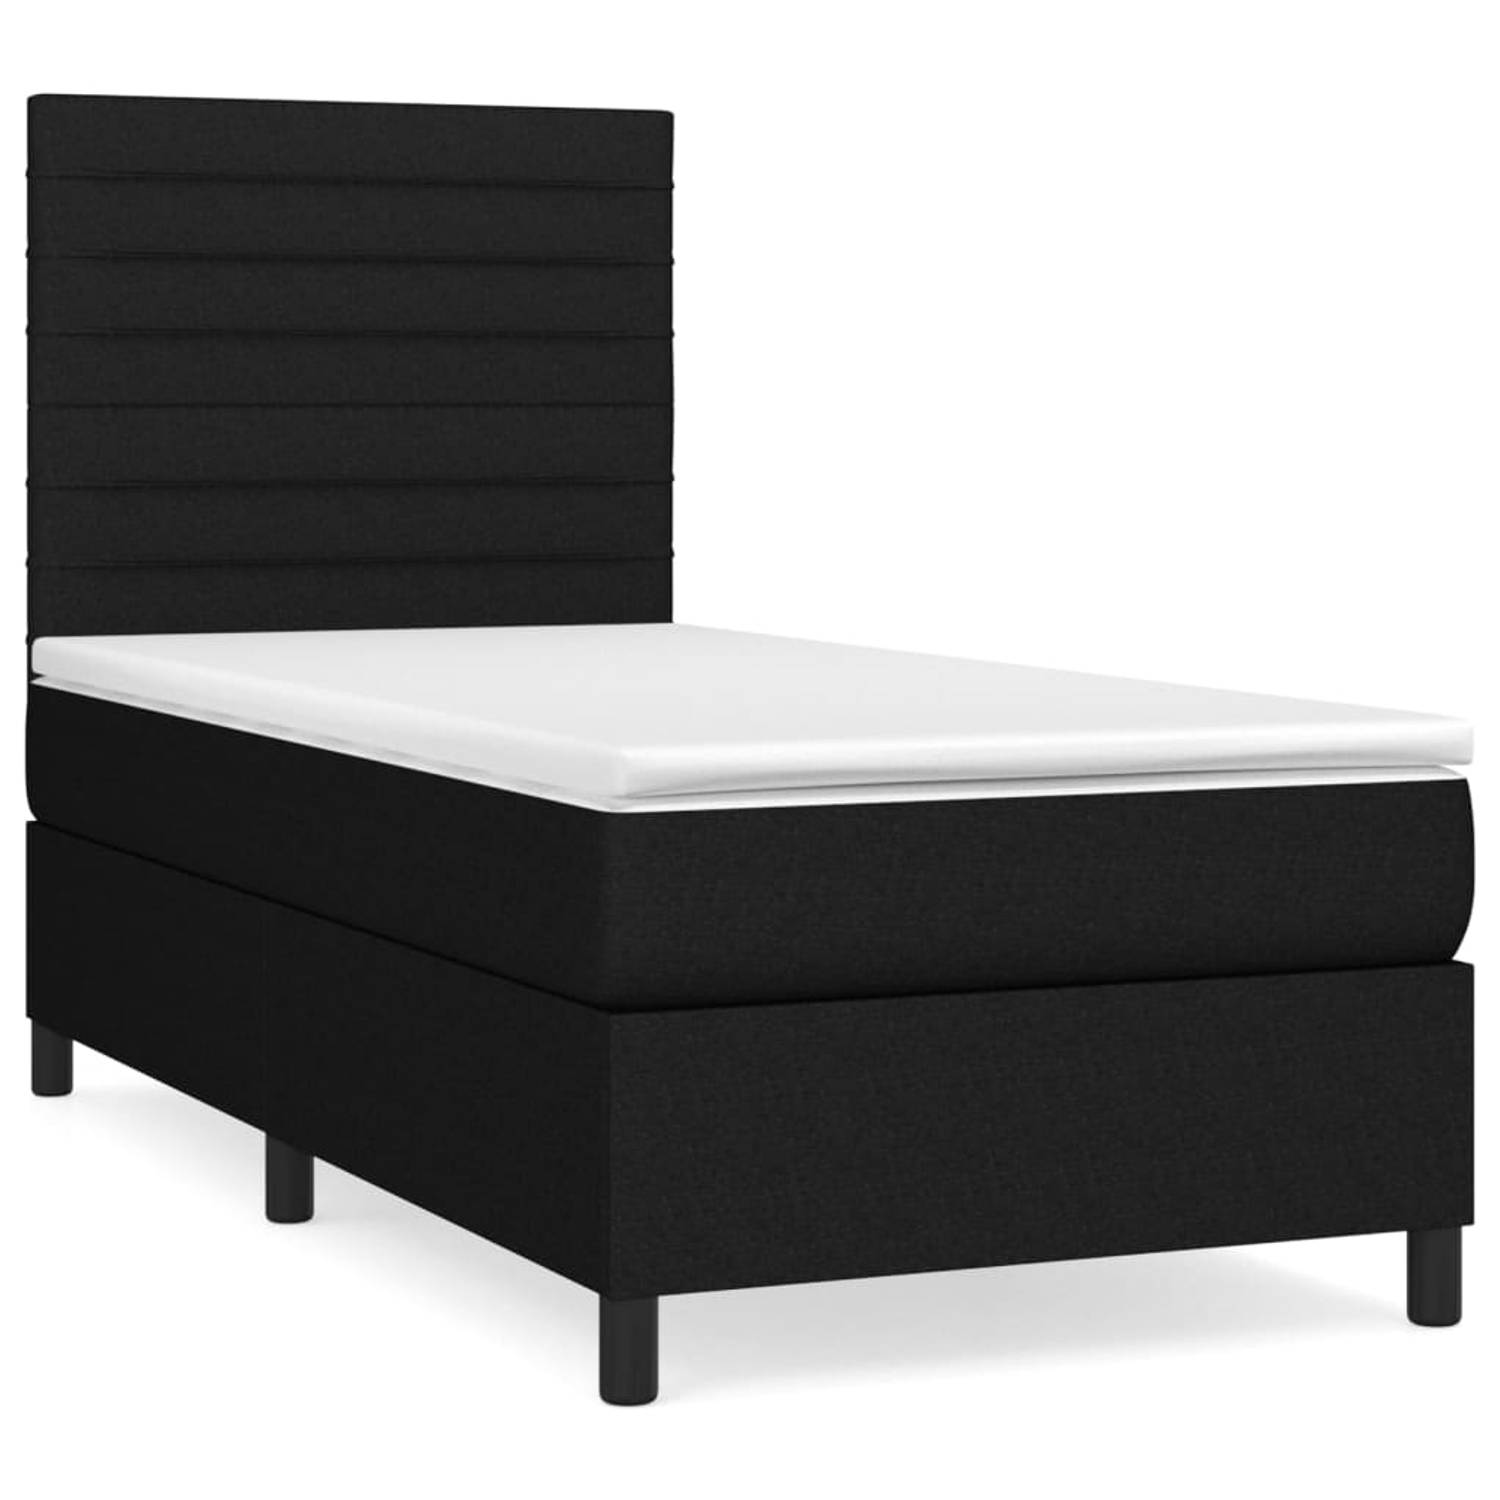 The Living Store Bed - Comfort - Boxspringbed - 203 x 100 x 118/128 cm - zwart